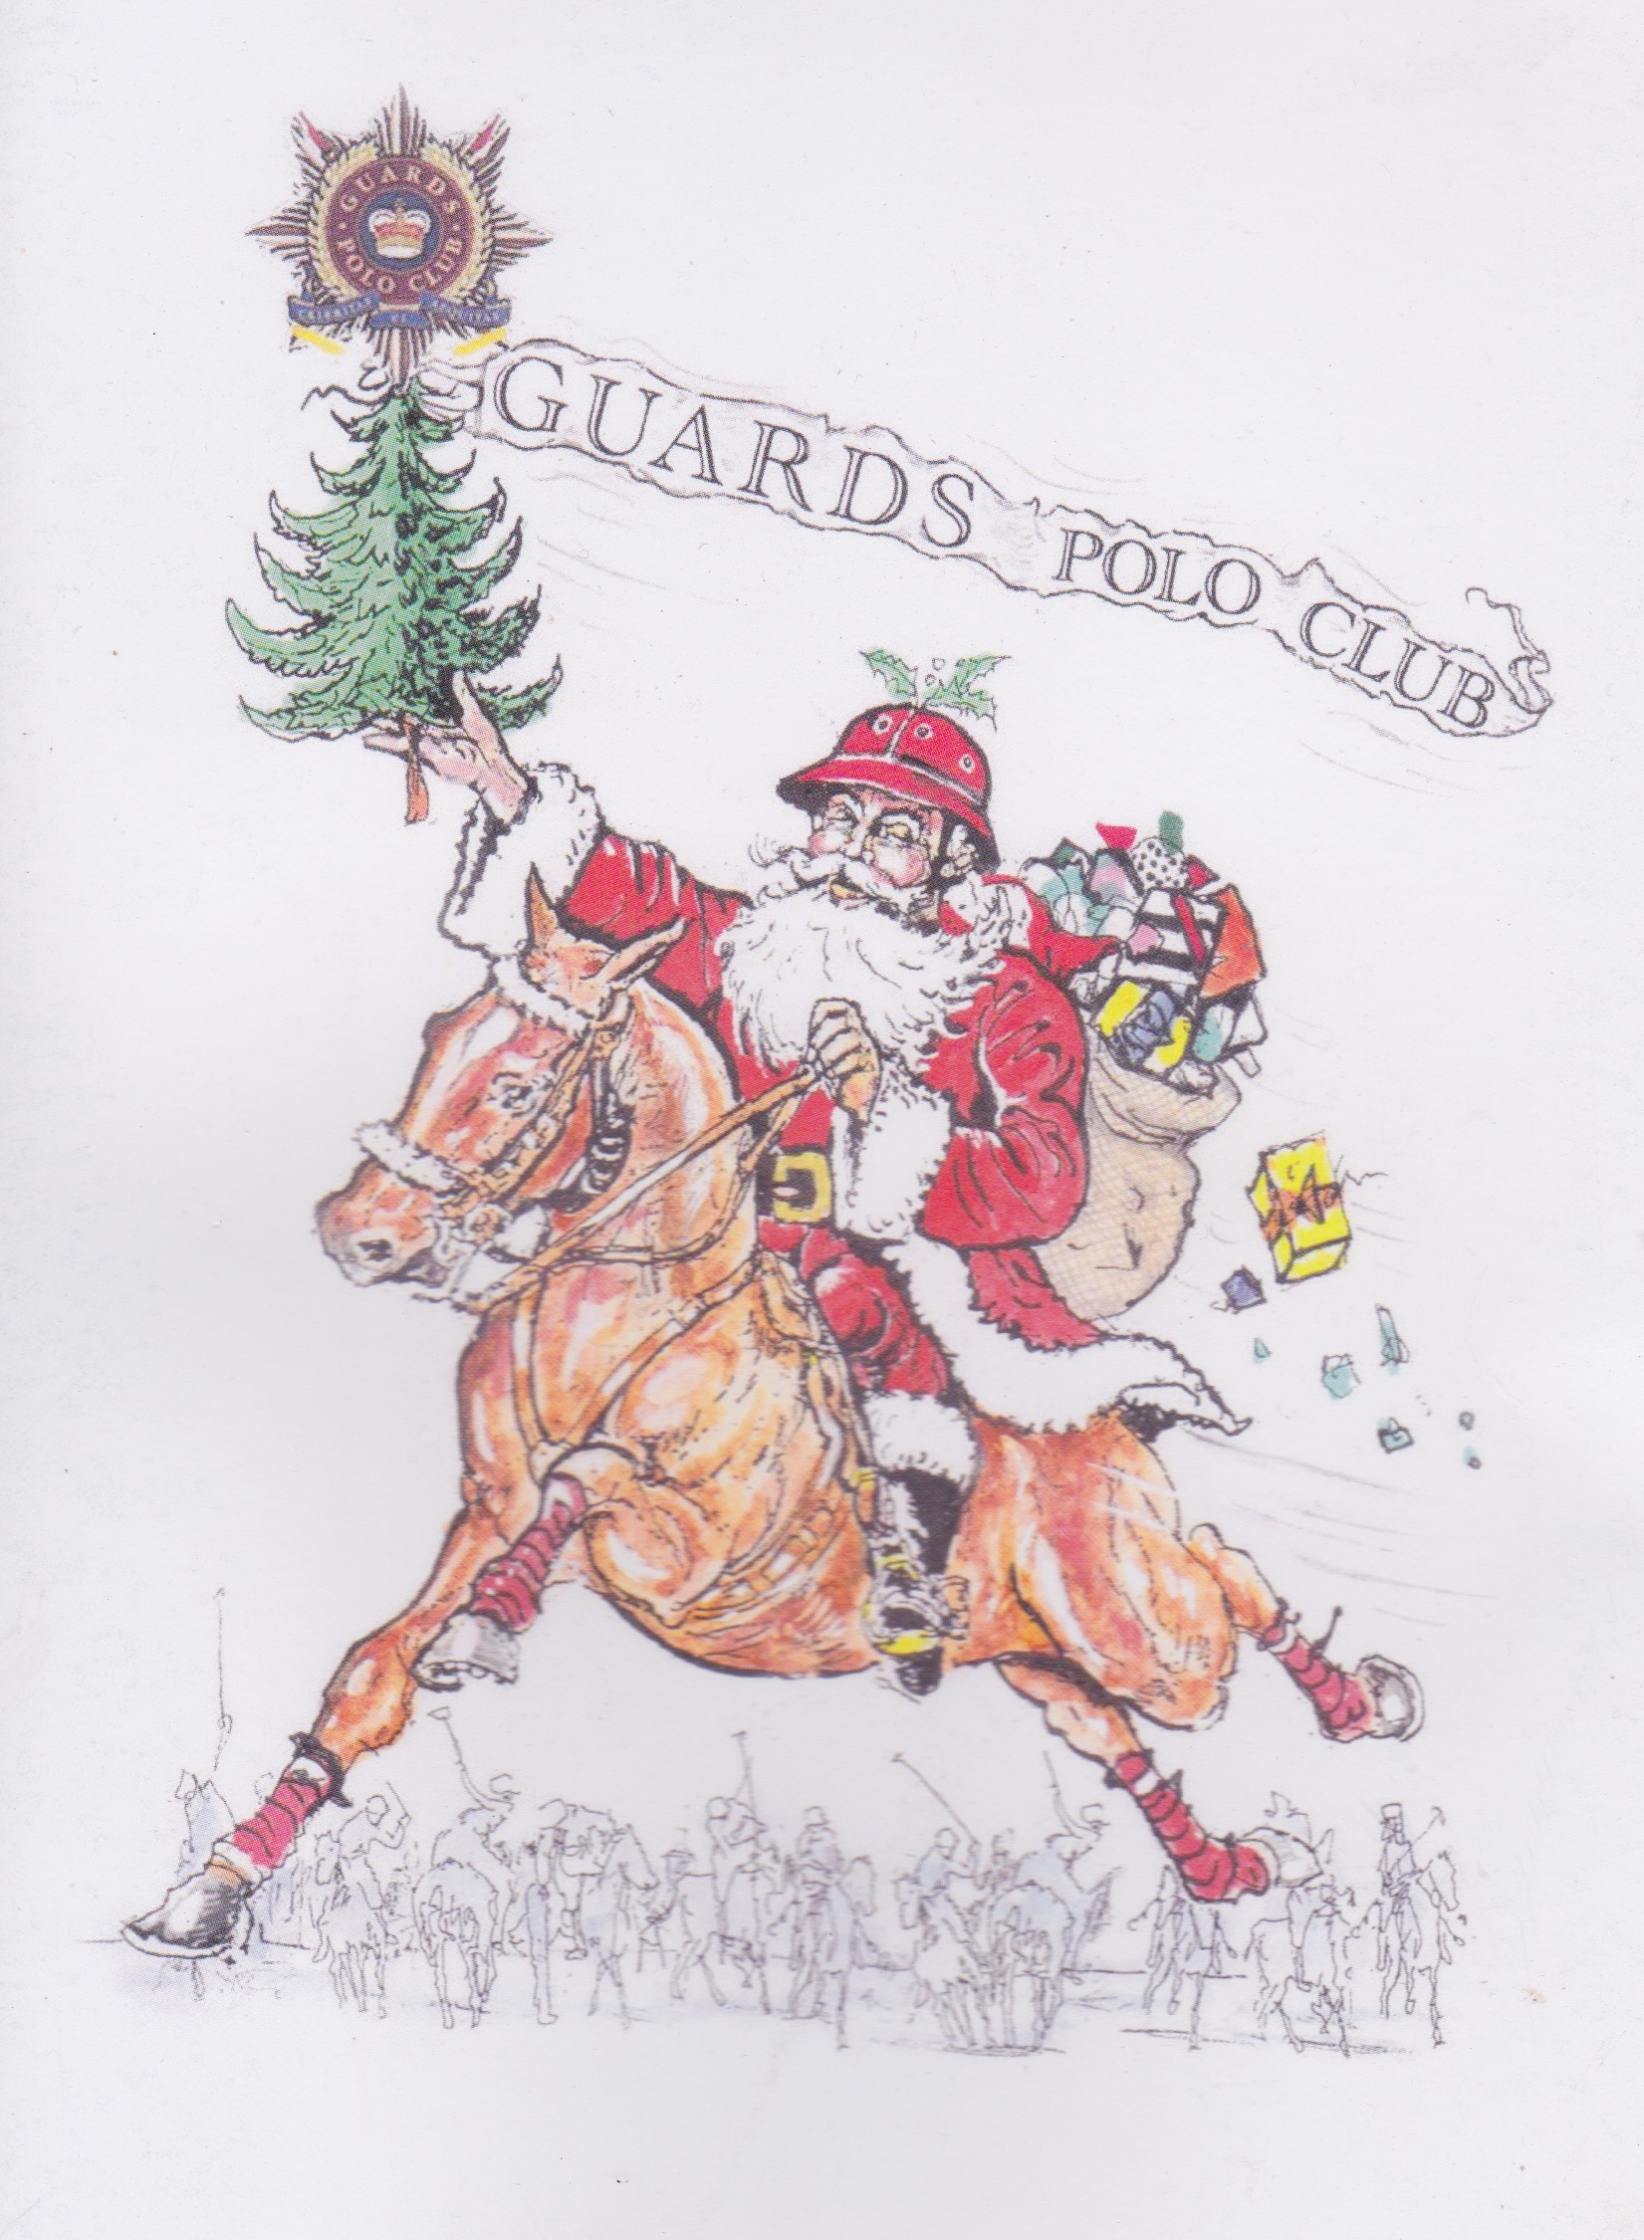 Chris Price Card for Guards Polo Club.jpg